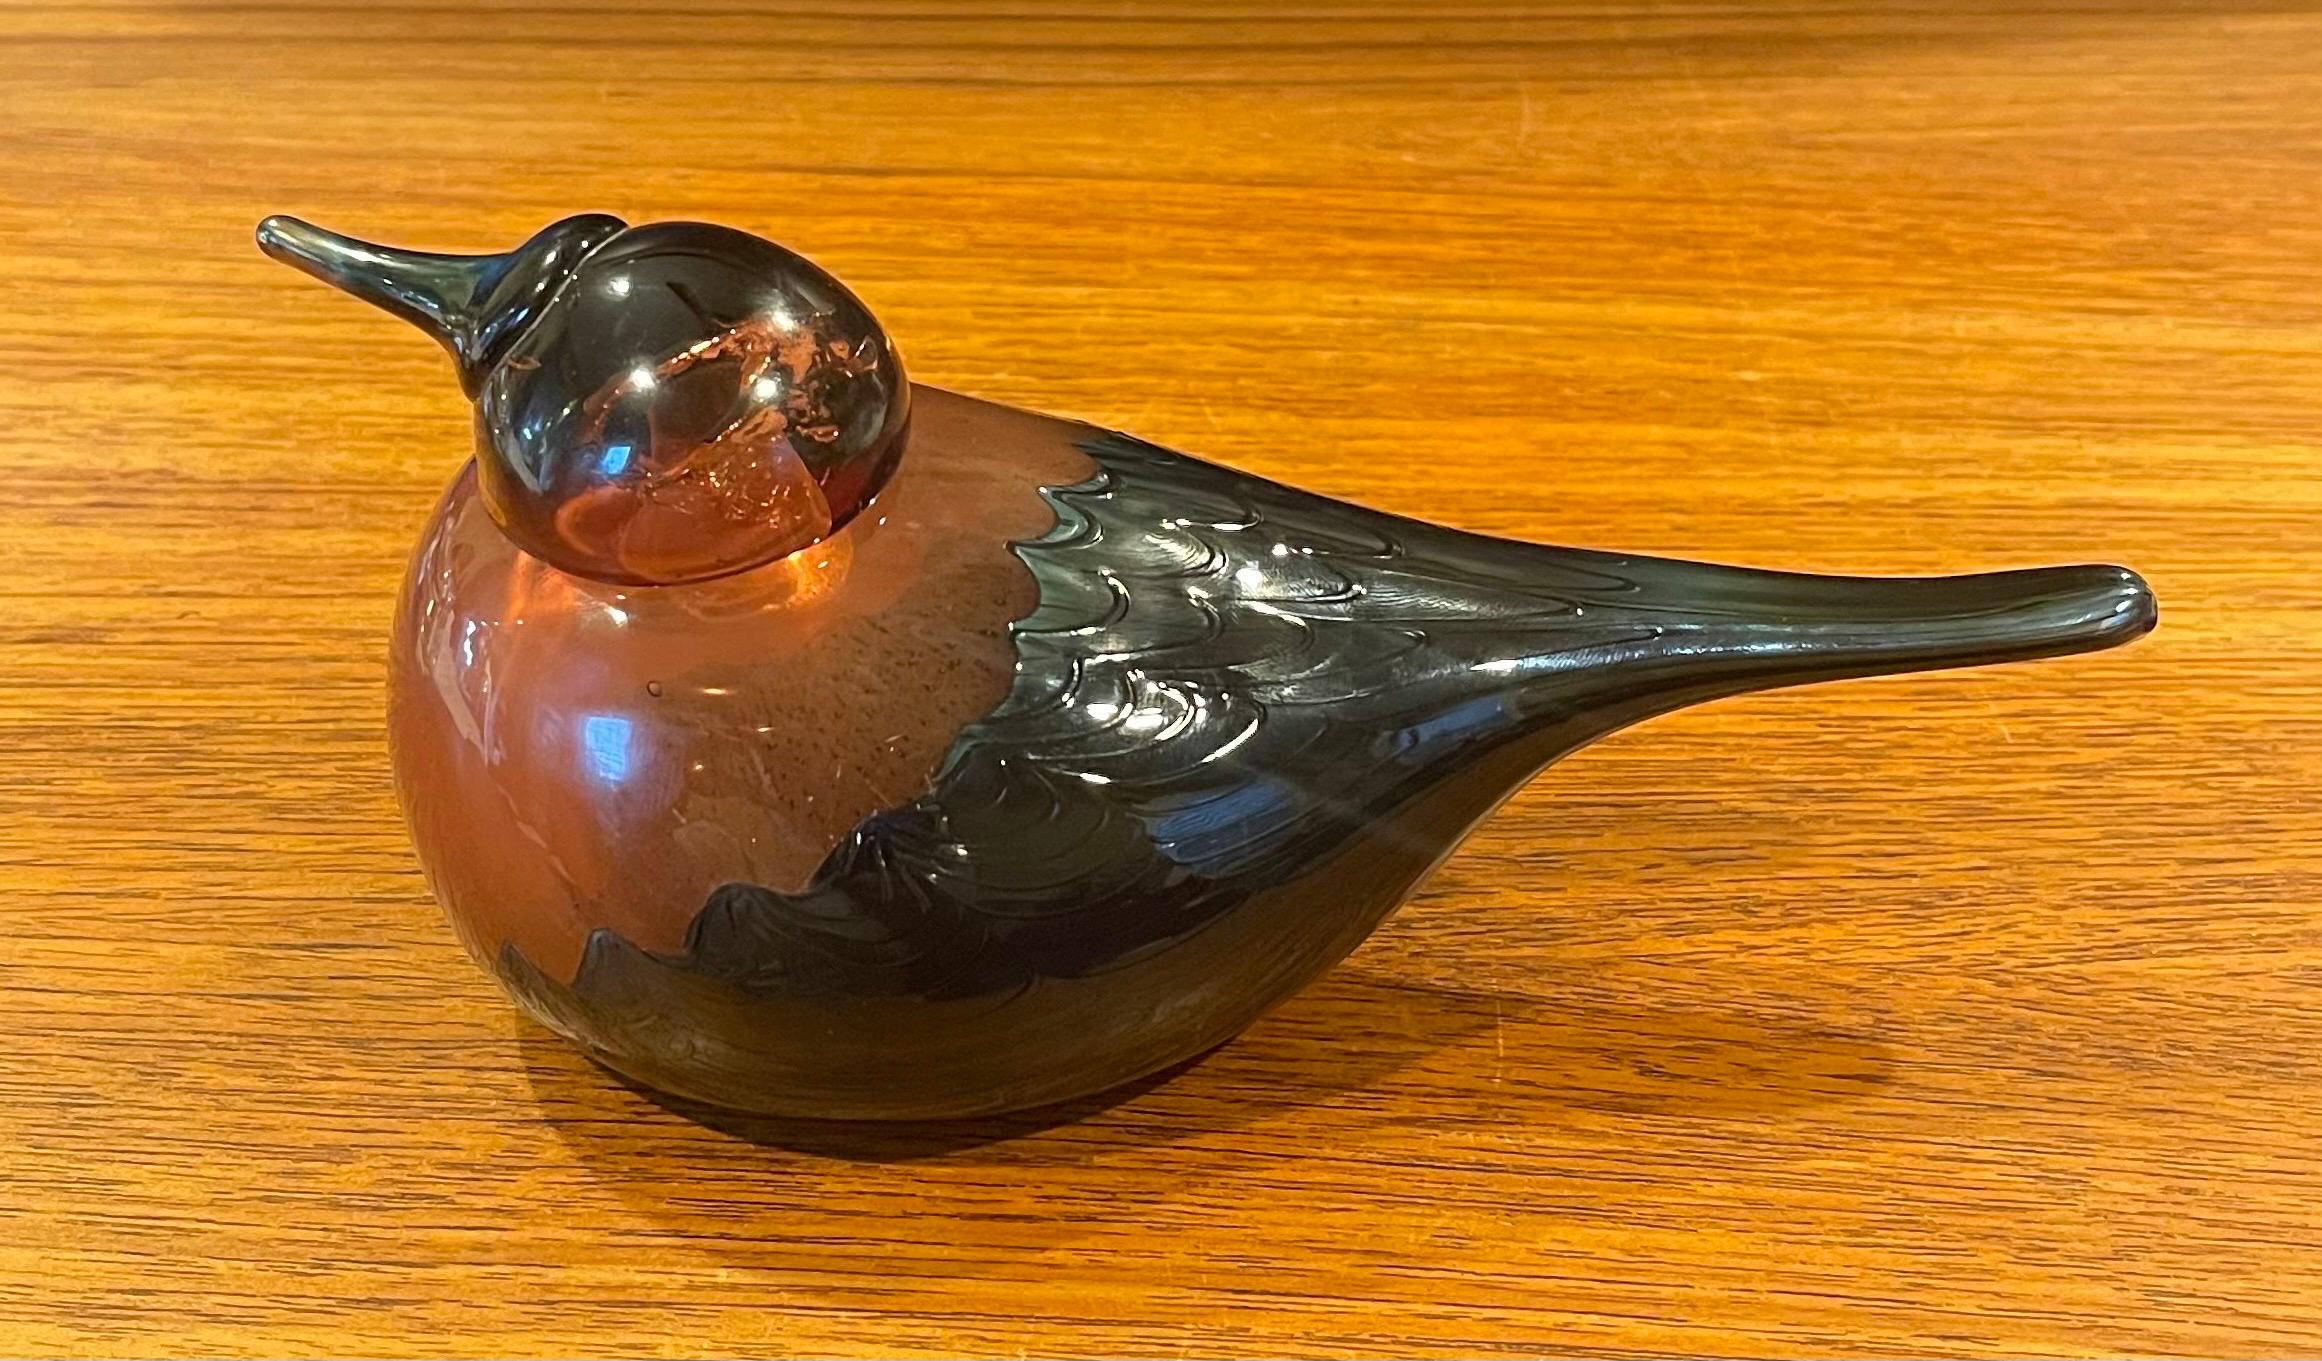 Limited Edition Art Glass Bird Sculpture by Oiva Toikka for Iittala of Finland In Good Condition For Sale In San Diego, CA